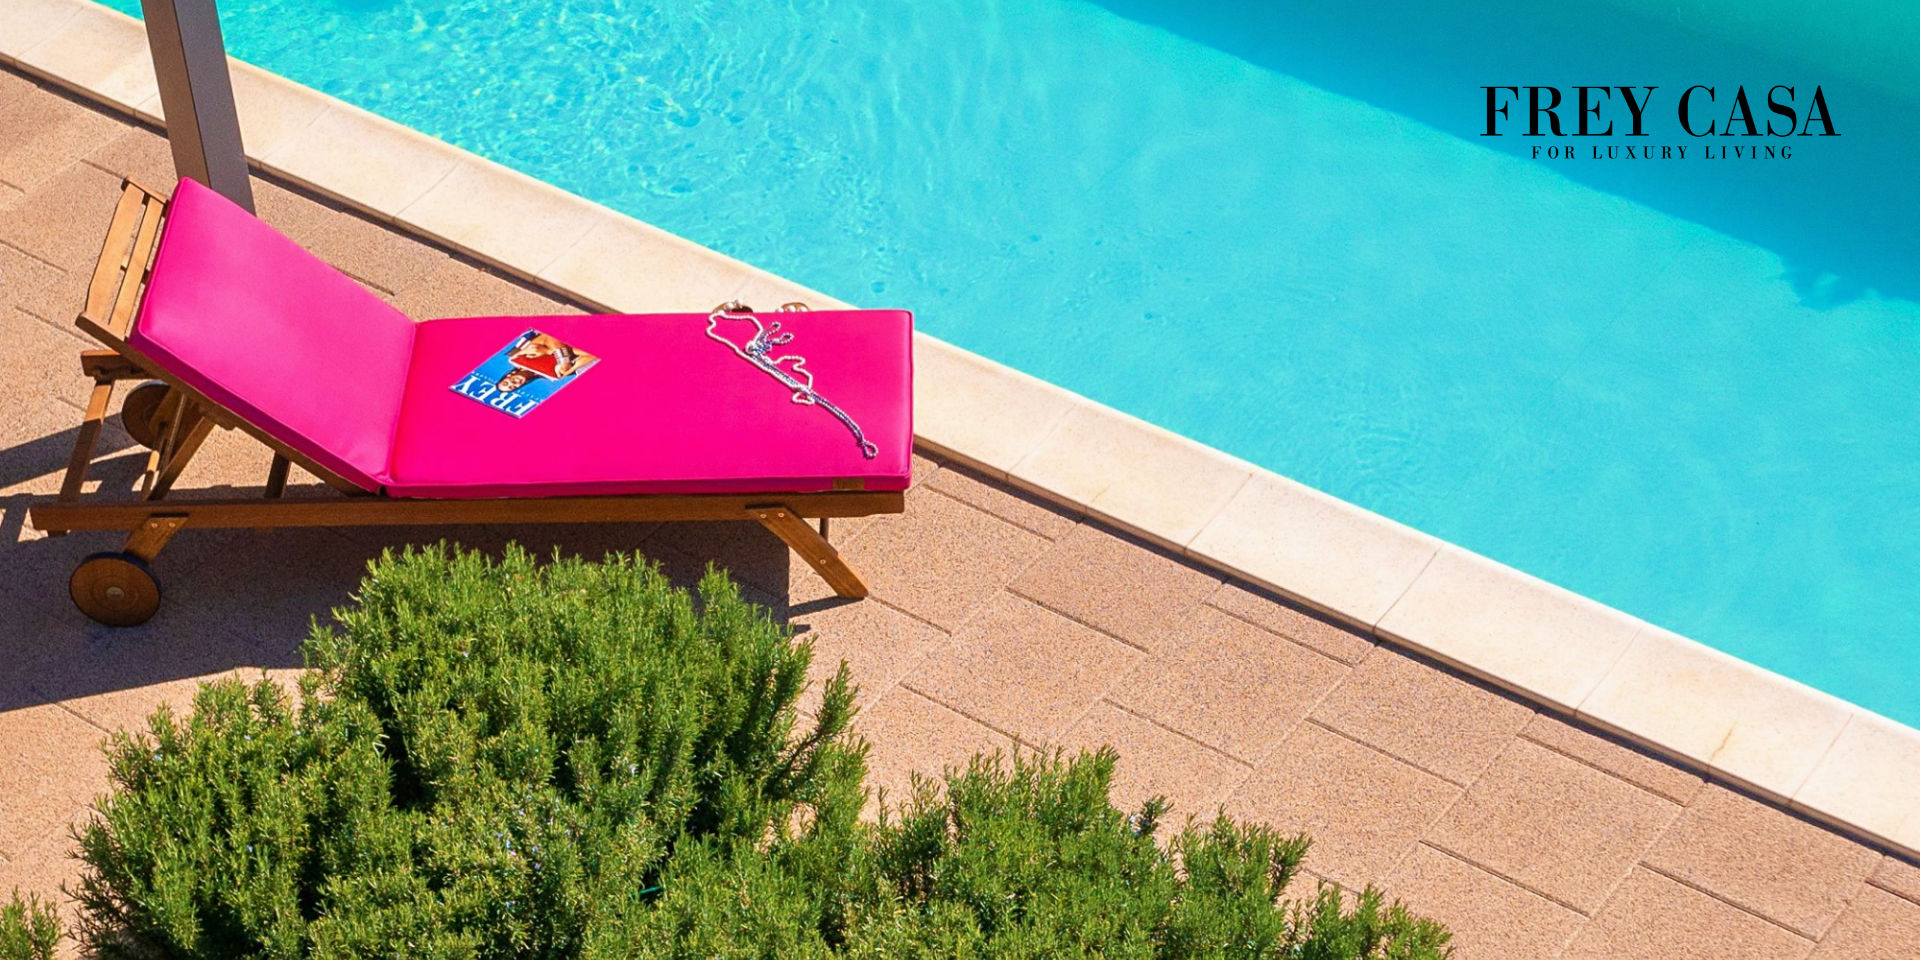 Water repellant, fadeproof, magenta Spradling fabric, the perfect solution for villa poolside lounger cushions by Frey Casa.